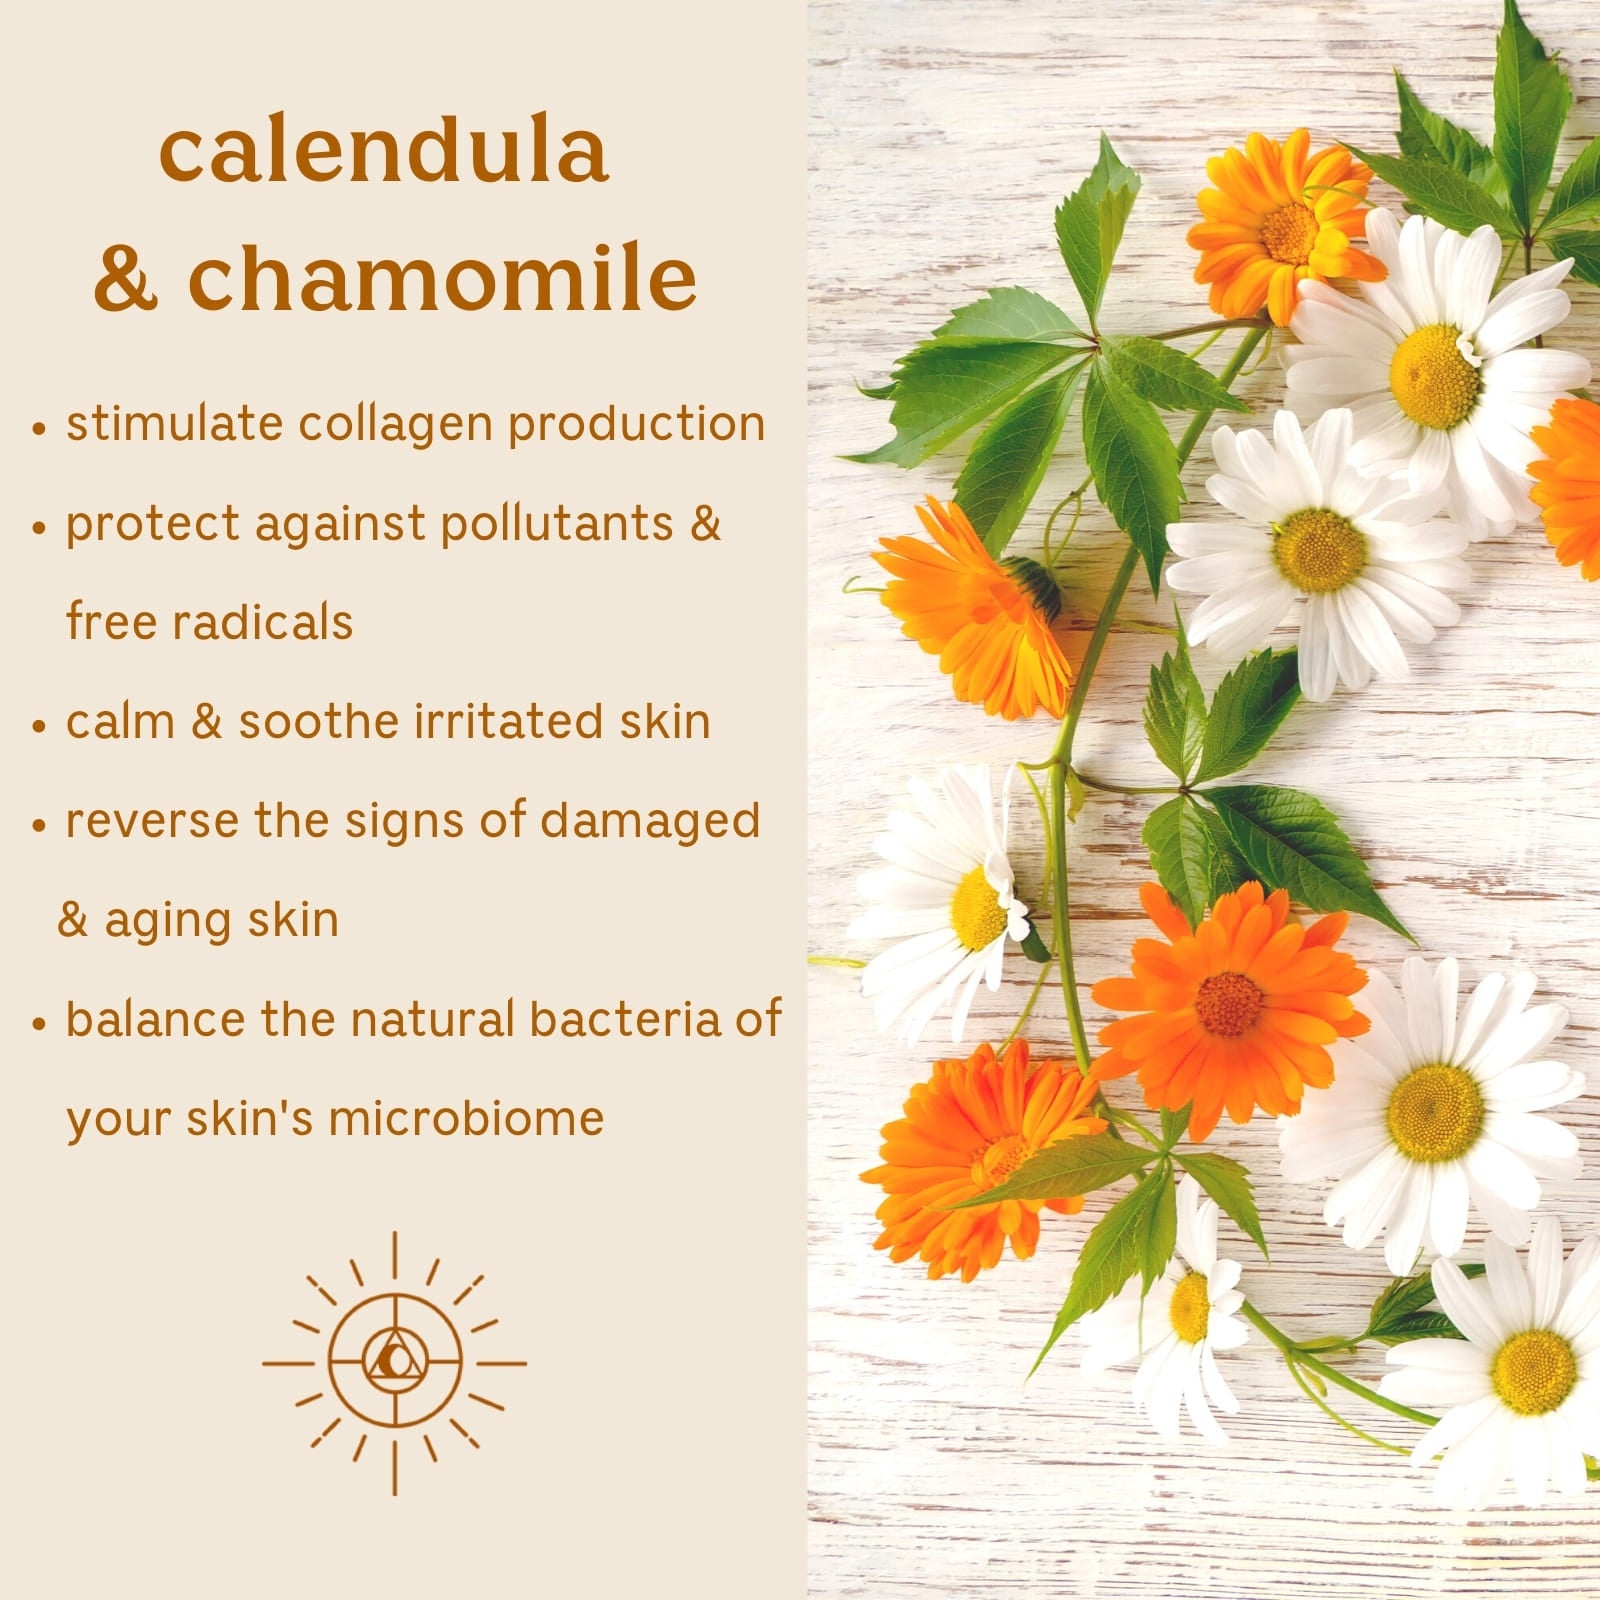 Solluna's Feel Good Cleanser key ingredient benefit description. Calendula & Chamonmile - Stimulate collagen production, Protect against pollutants & free radicals, Calm & soothe irritated skin, Reverse the signs of damaged & aging skin, Balance the natural bacteria of your skin's microbiome